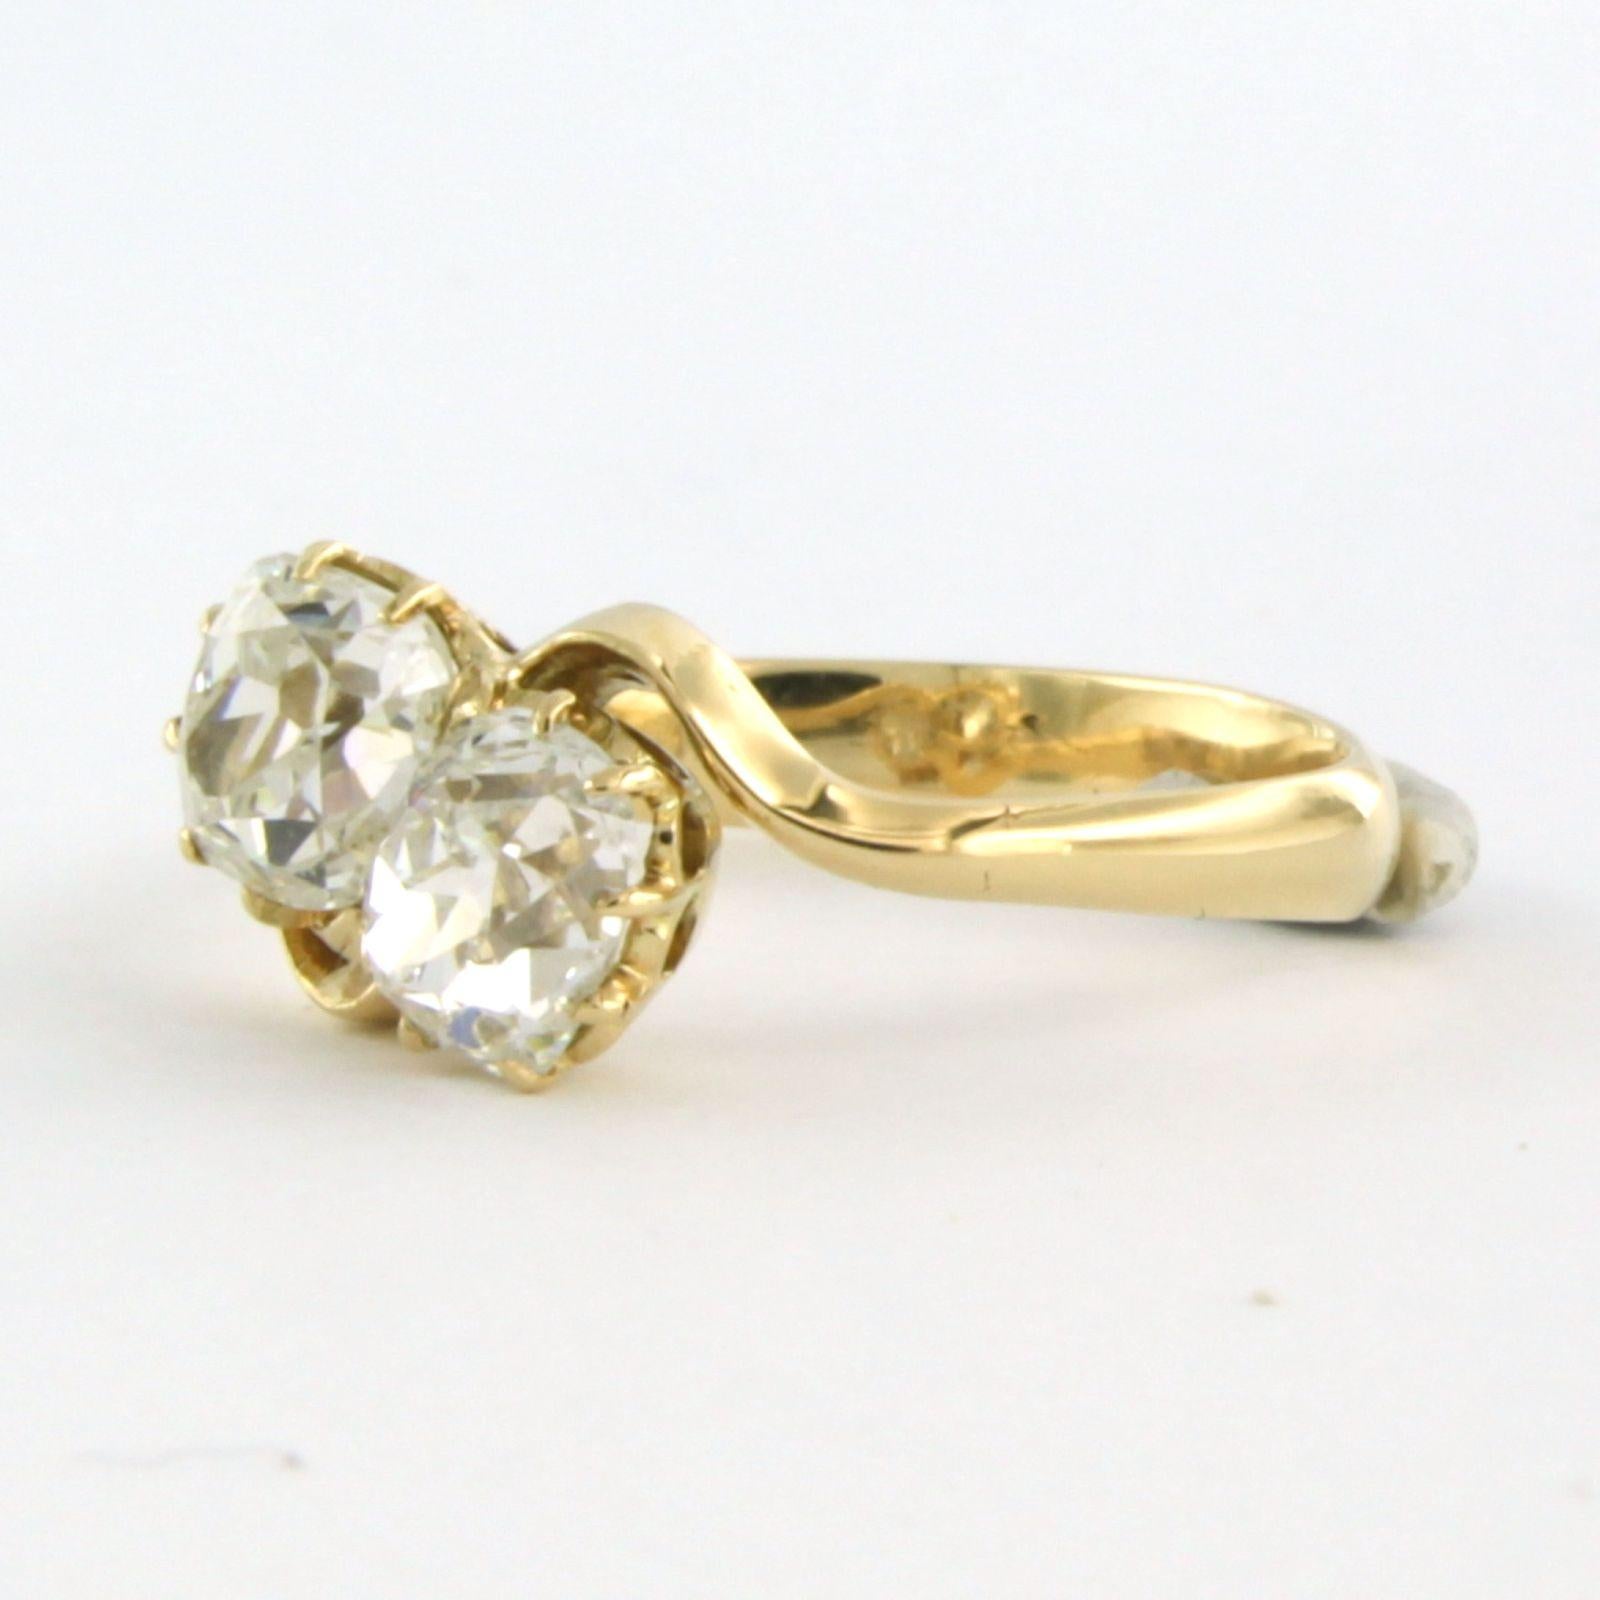 Early Victorian IGI Diamond report - 14k gold ring set with old mine cut diamonds up to 1.59ct